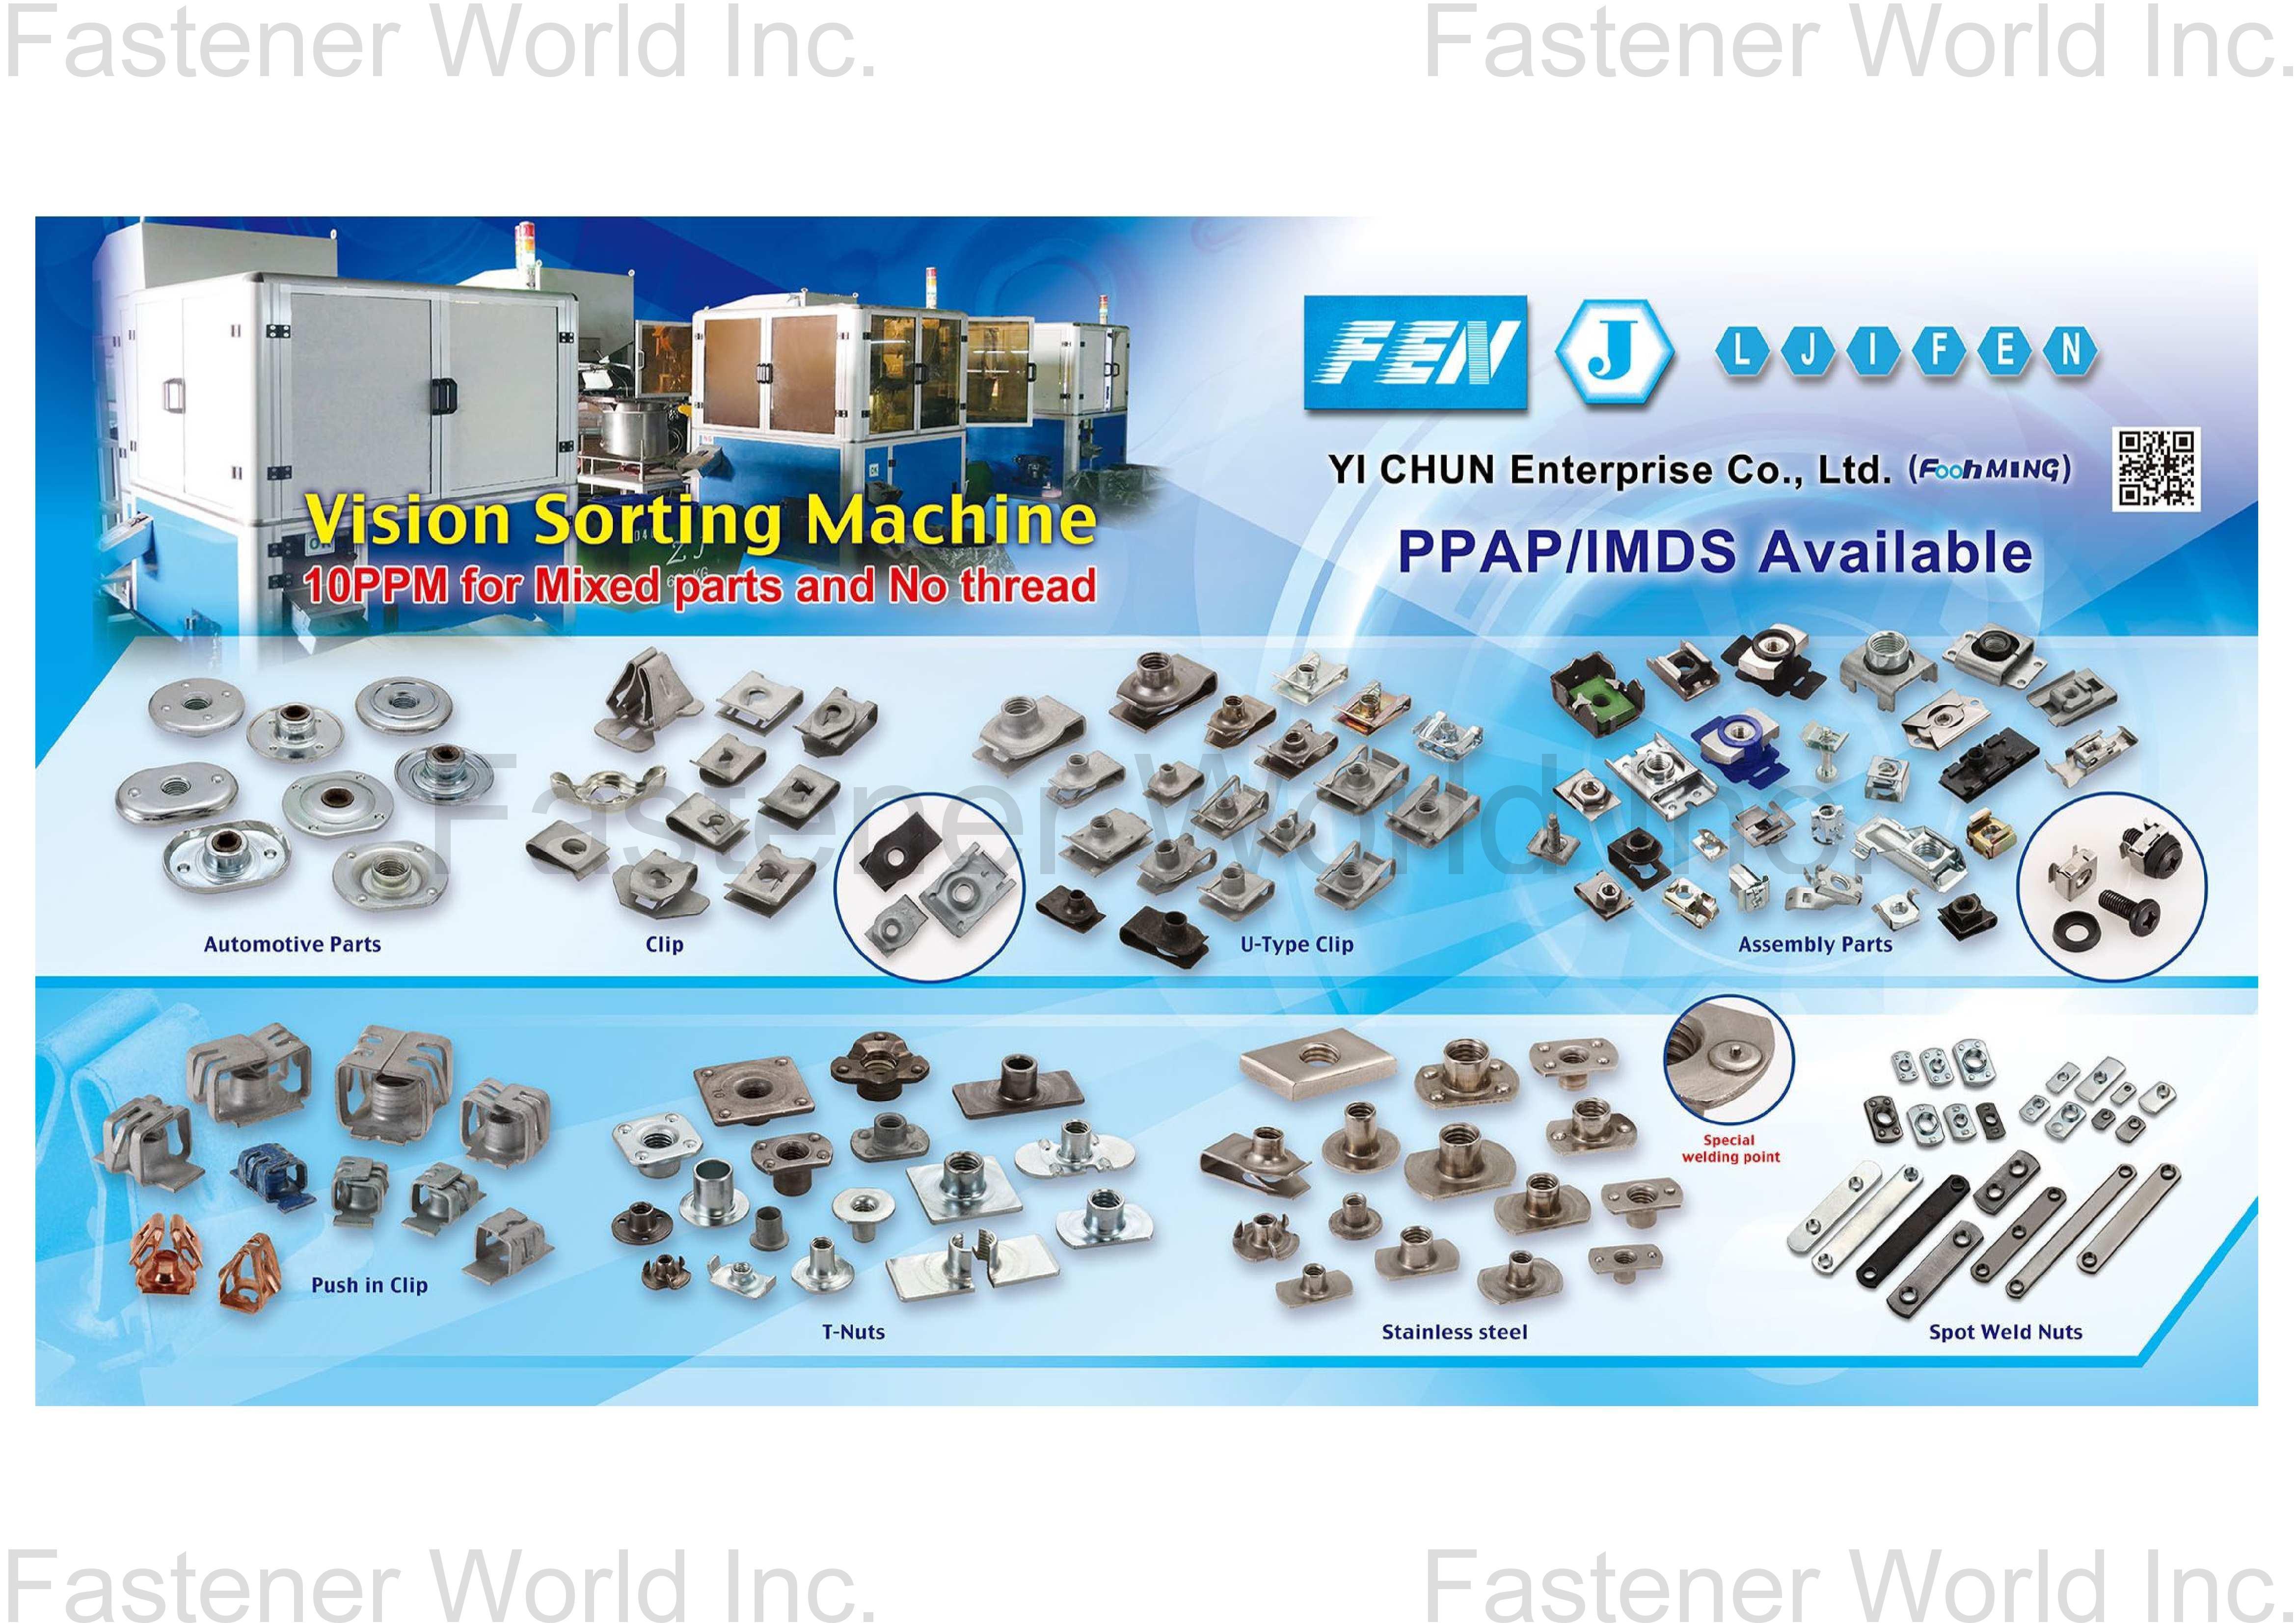 YI CHUN ENTERPRISE CO., LTD.  , Stamping & Cold Forming, Automotive Parts, Clip, U-Type Clip, Assembly Parts, Push in Clip, T-Nuts, Stainless Steel, Spot Weld Nuts , Stamped Parts